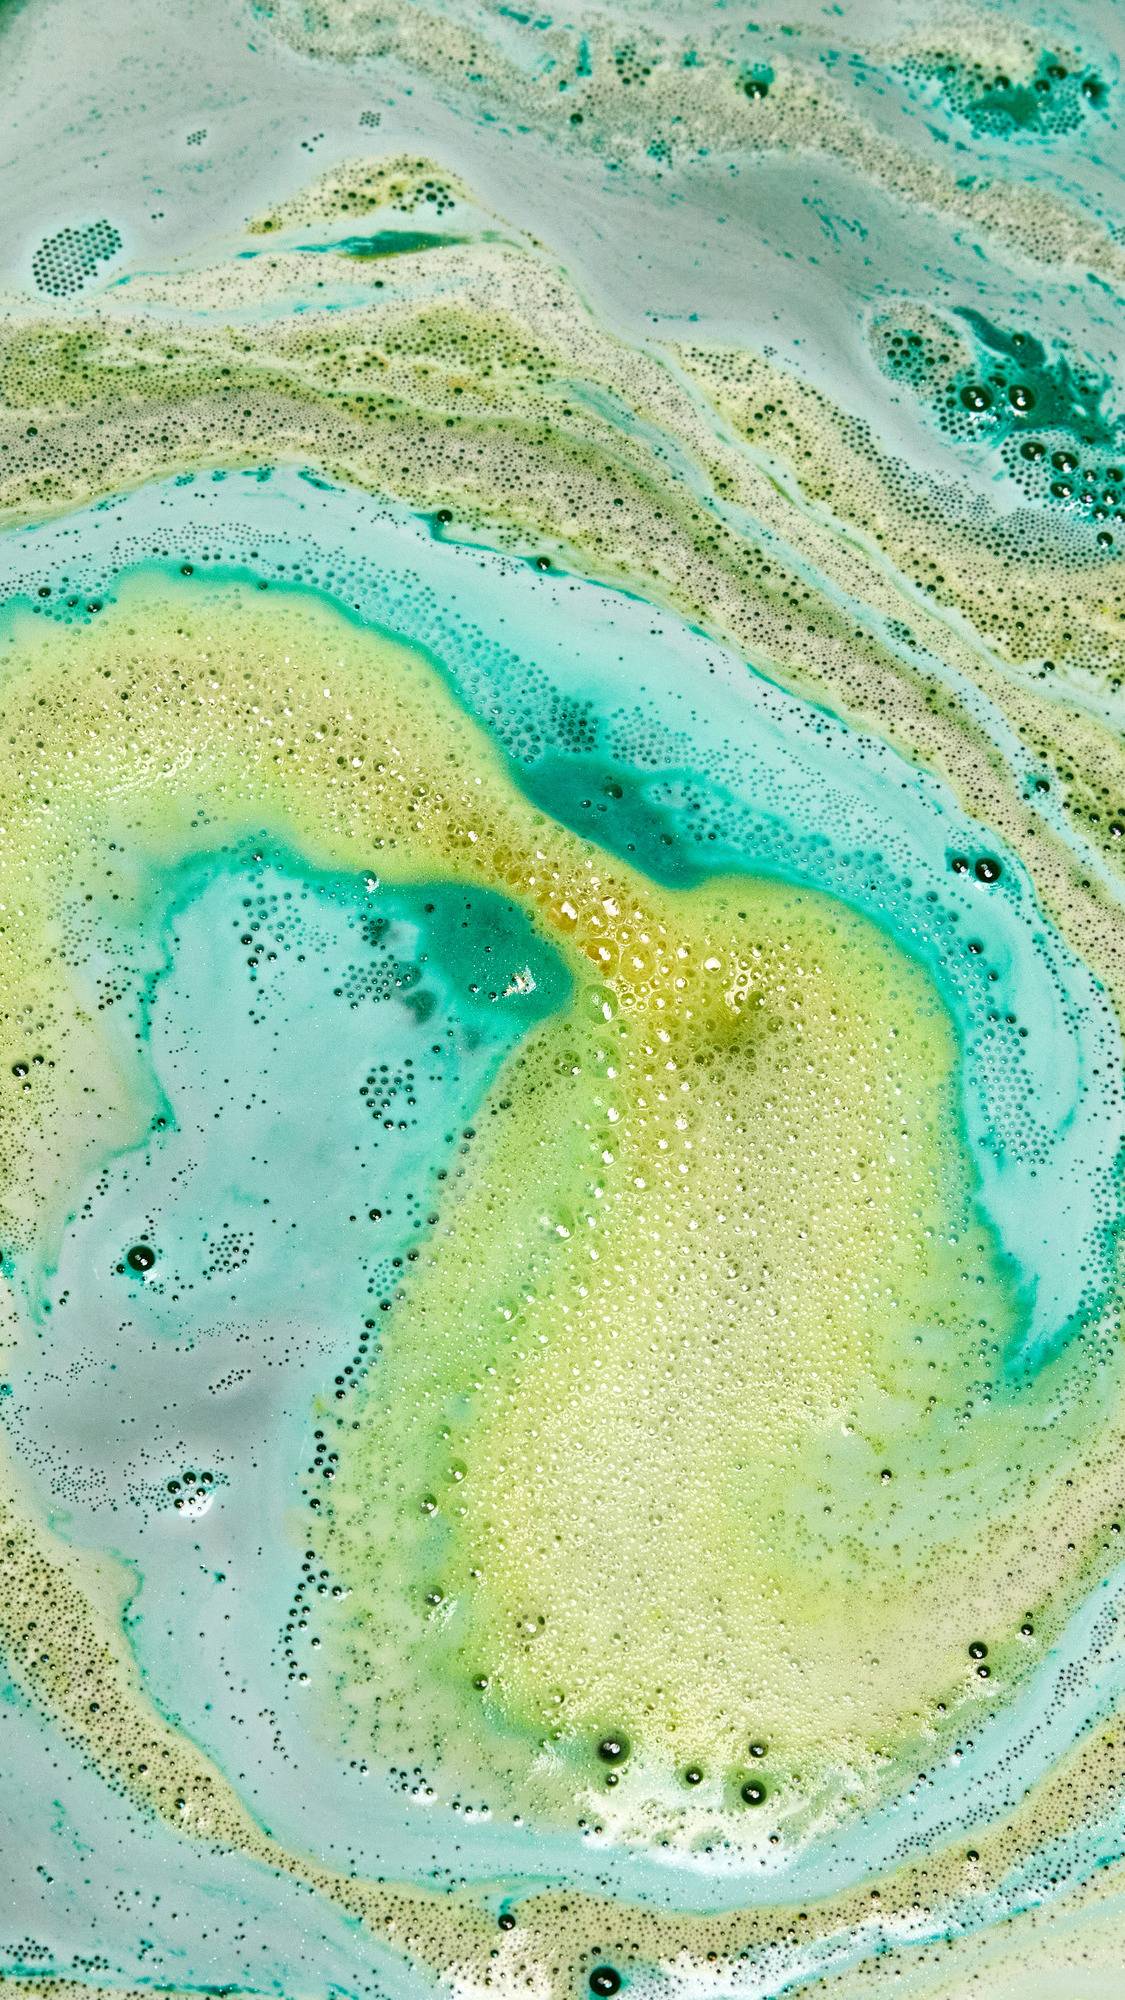 The Druid of Bath bath bomb is slowly dissolving leaving behind bubbly swirls of deep green and golden yellow foam. 